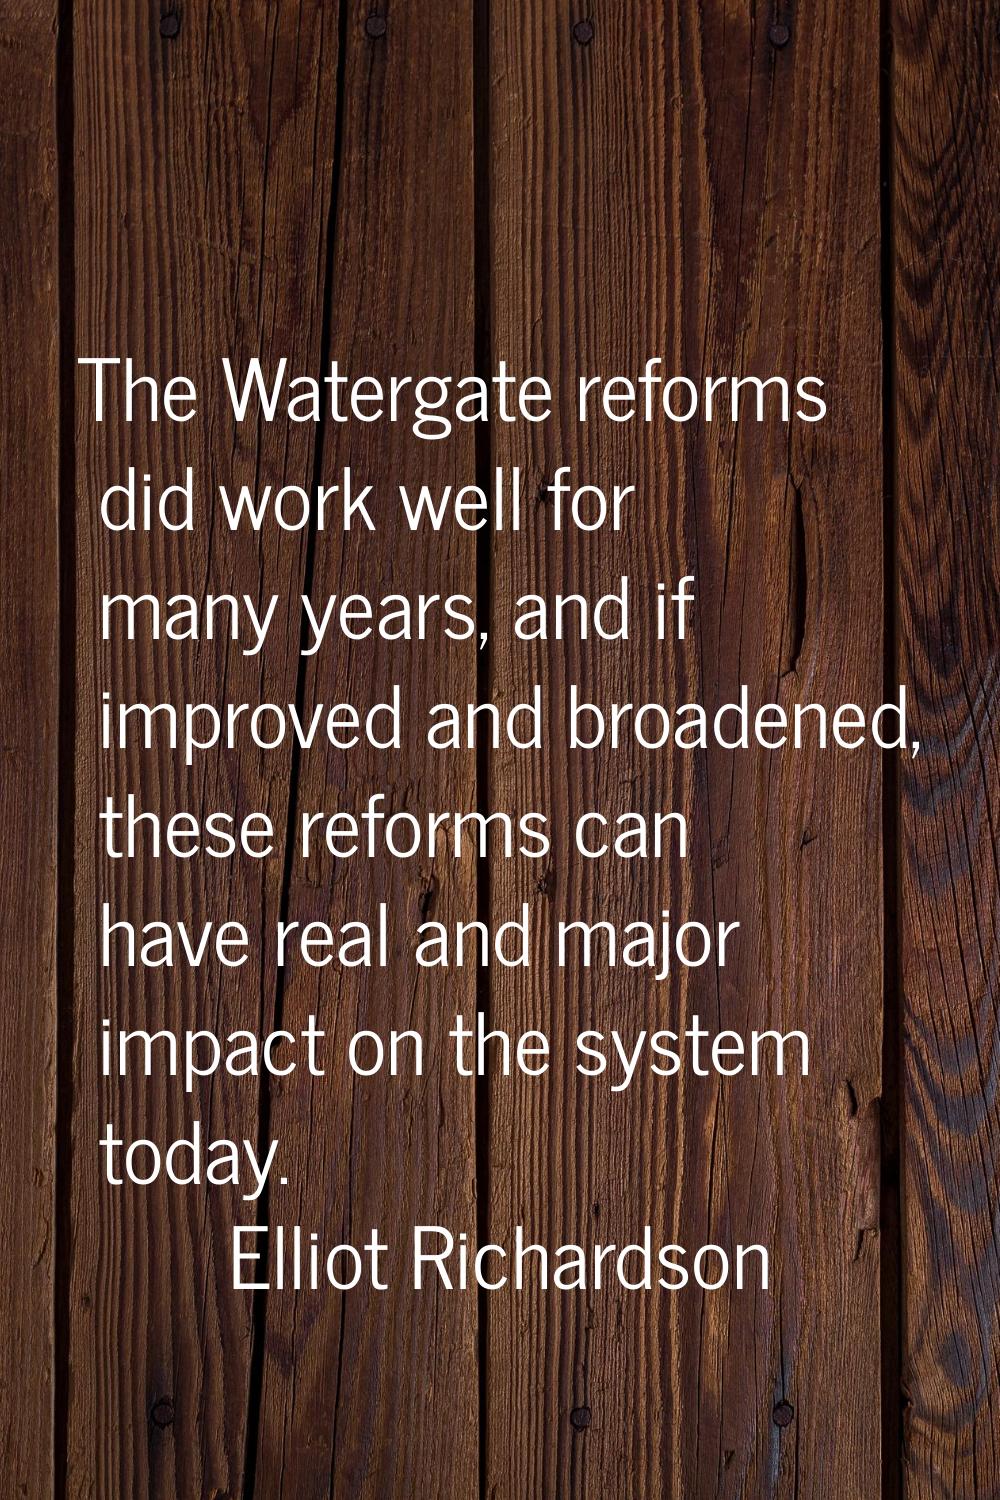 The Watergate reforms did work well for many years, and if improved and broadened, these reforms ca